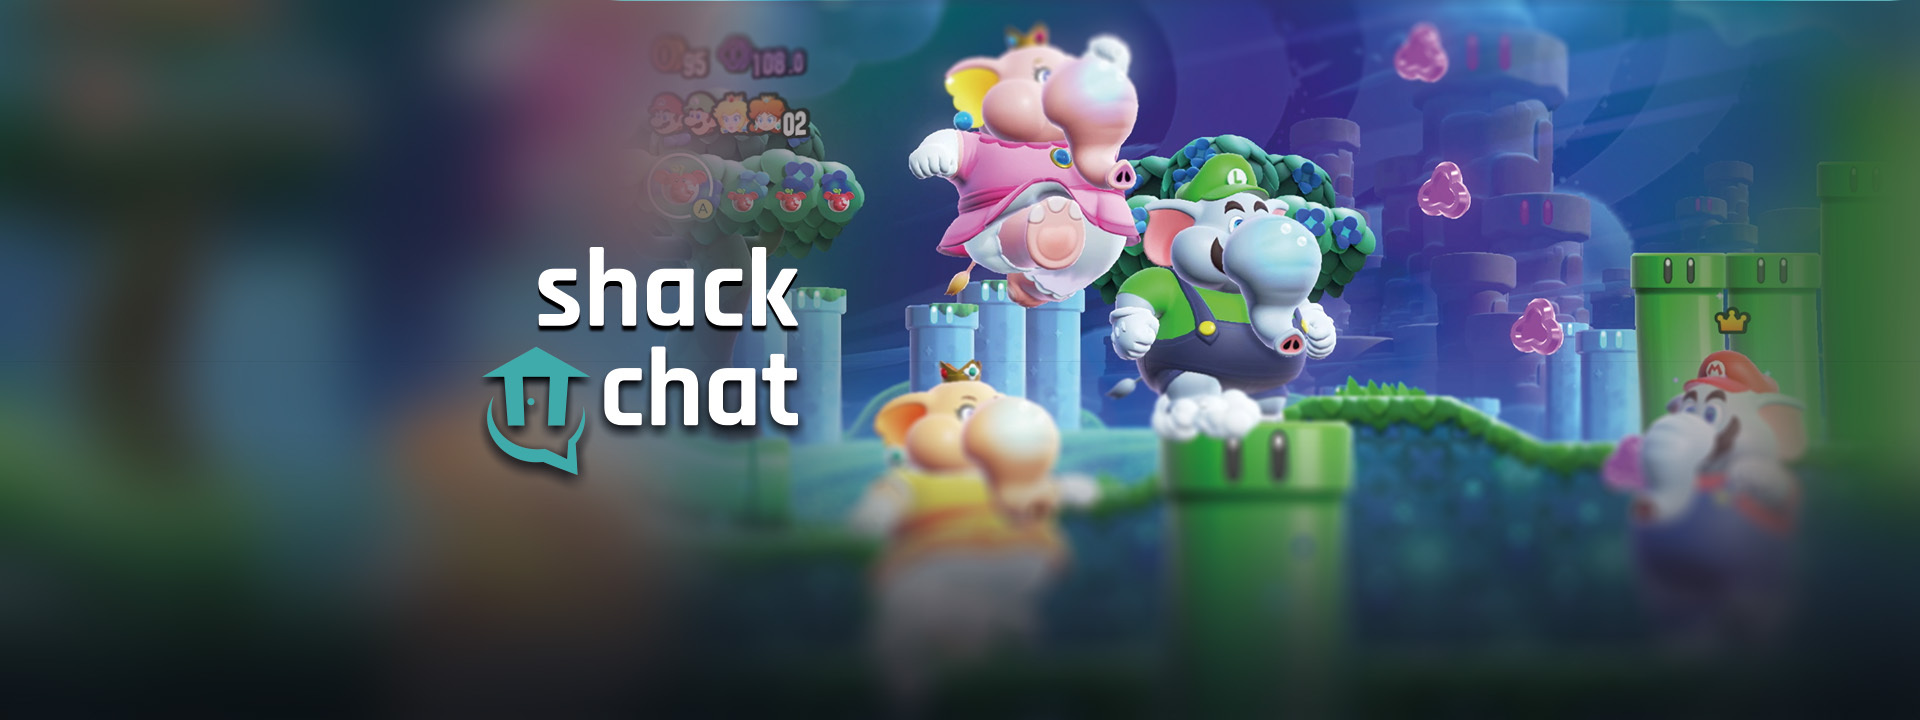 Shack Chat: What is your favorite Mario video game of all-time?